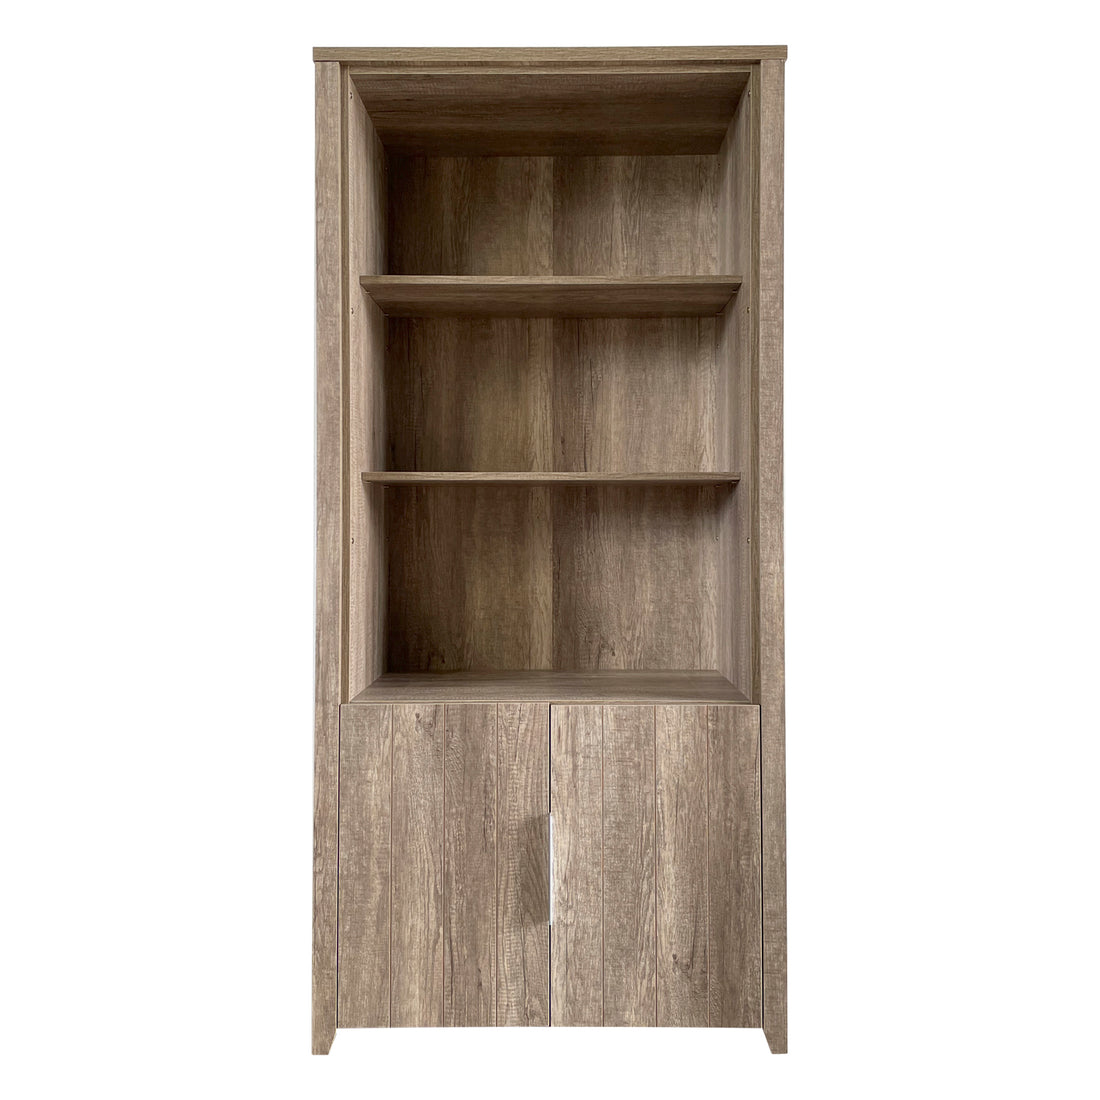 Display Shelf Book Case Stand Bookshelf Natural Wood like MDF in Oak Colour-Bookcases &amp; Shelves-PEROZ Accessories